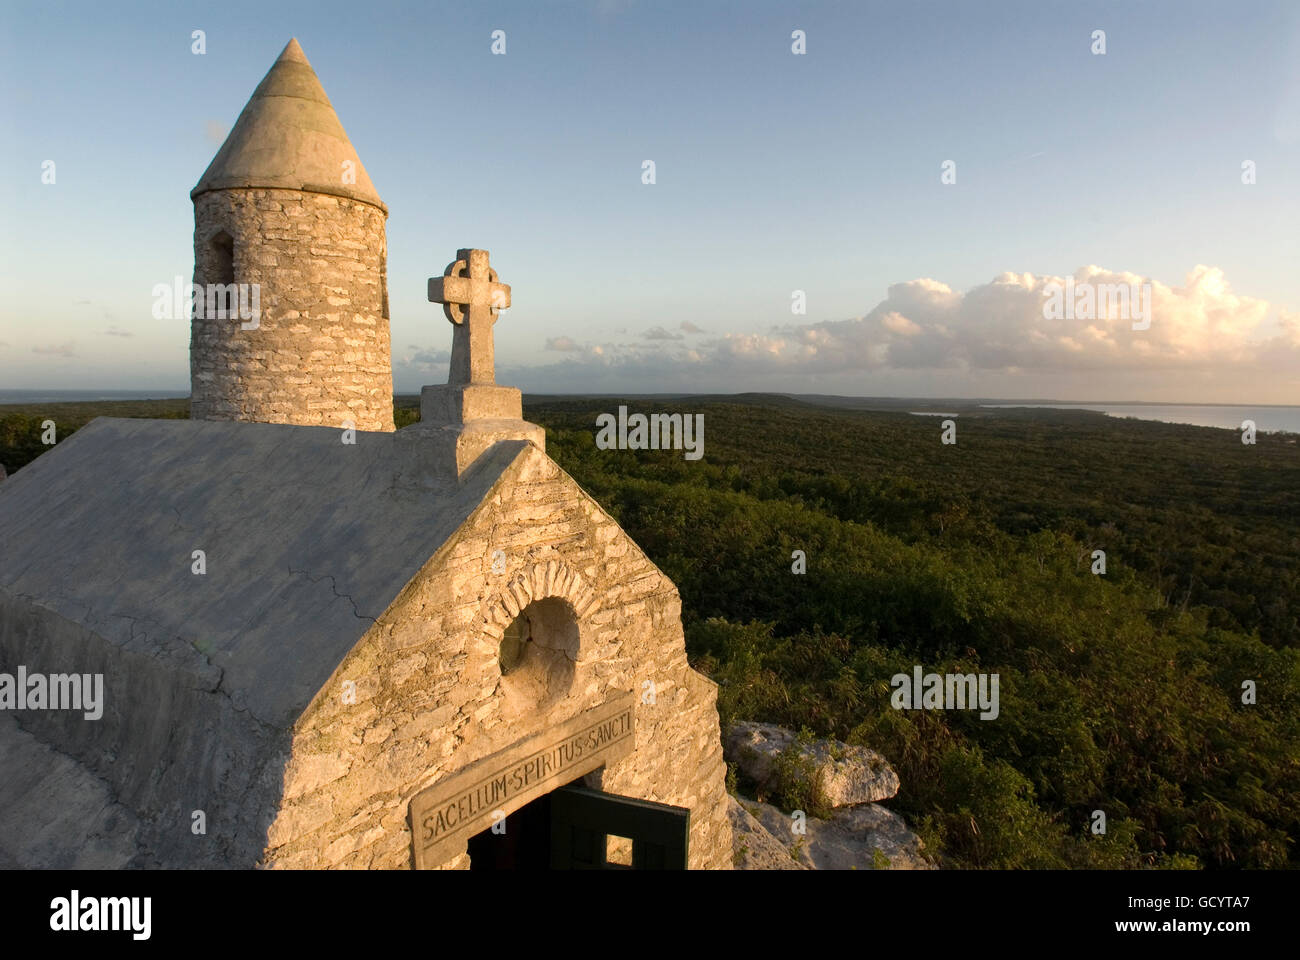 The Ermite small monastery at the top of Mount Alvernia on Cat island, over 63 meters, Bahamas. Mt. Alvernia Hermitage and Fathe Stock Photo